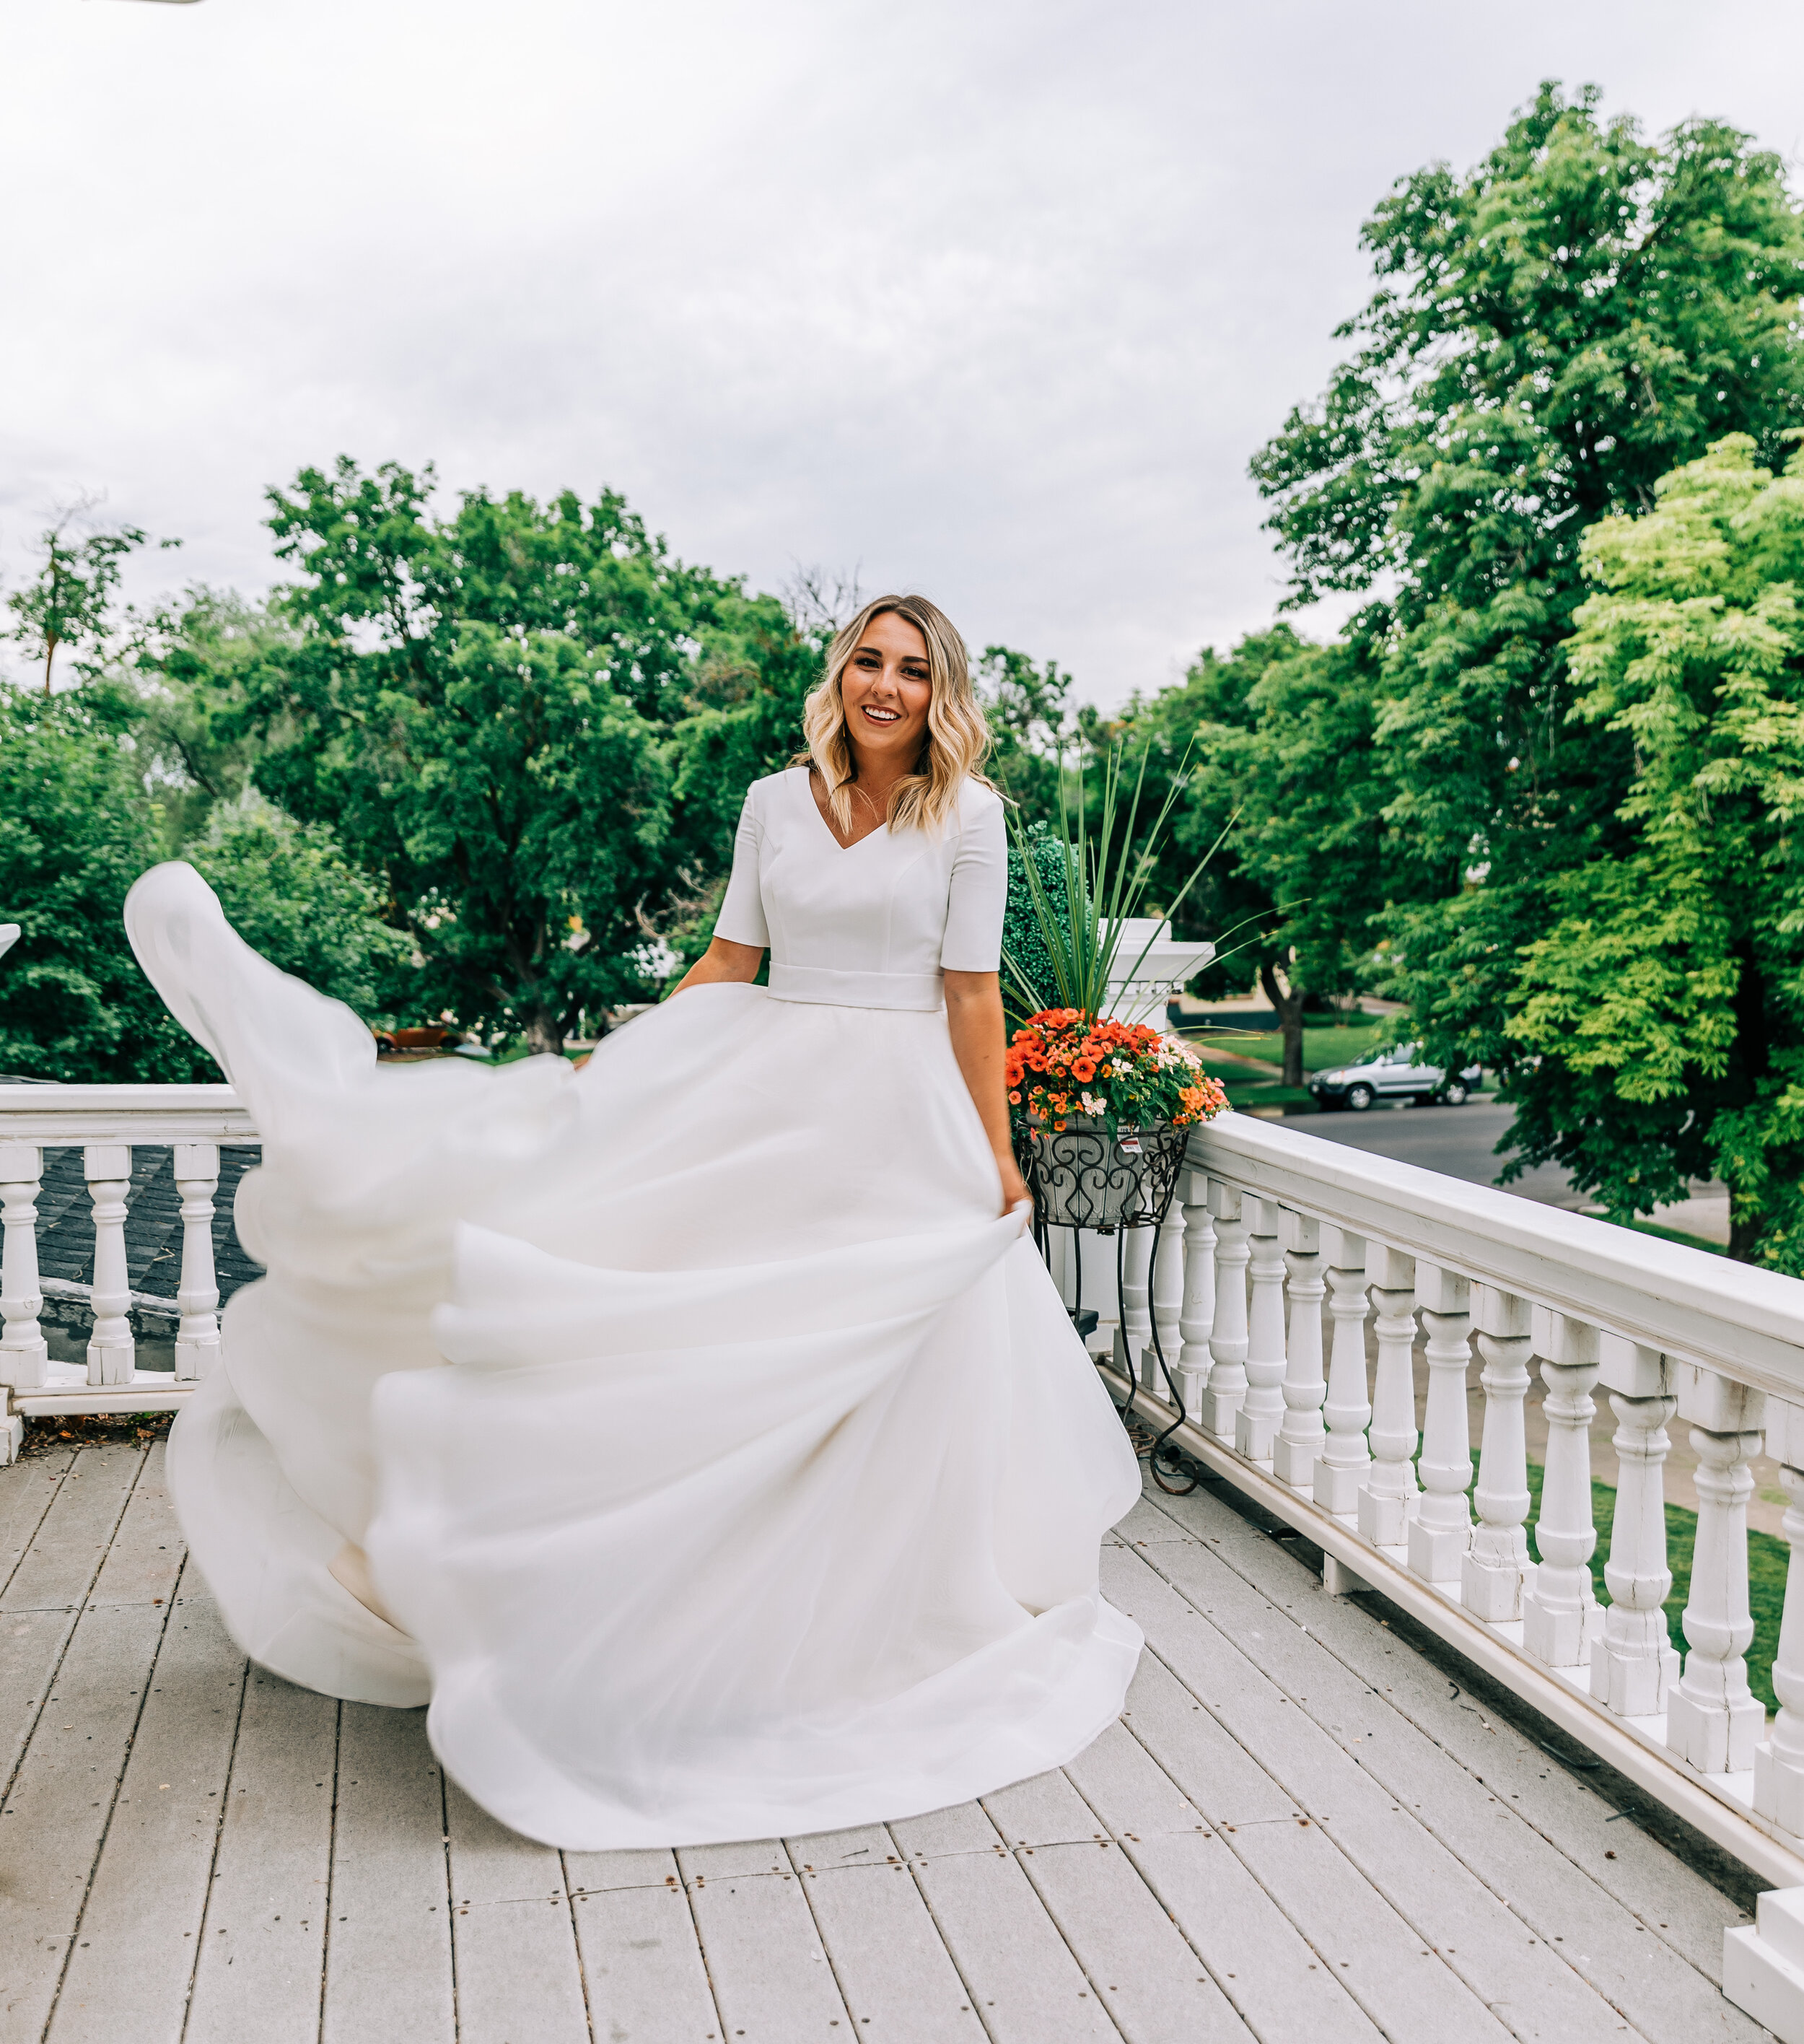  A glowing bride dancing gracefully in her flowing modern ball gown by Elizabeth Cooper Design. Bridal photo shoot inspiration bridal aesthetic Logan photo shoot inspiration Victorian home Utah bridal inspiration bridal pose inspiration modest weddin